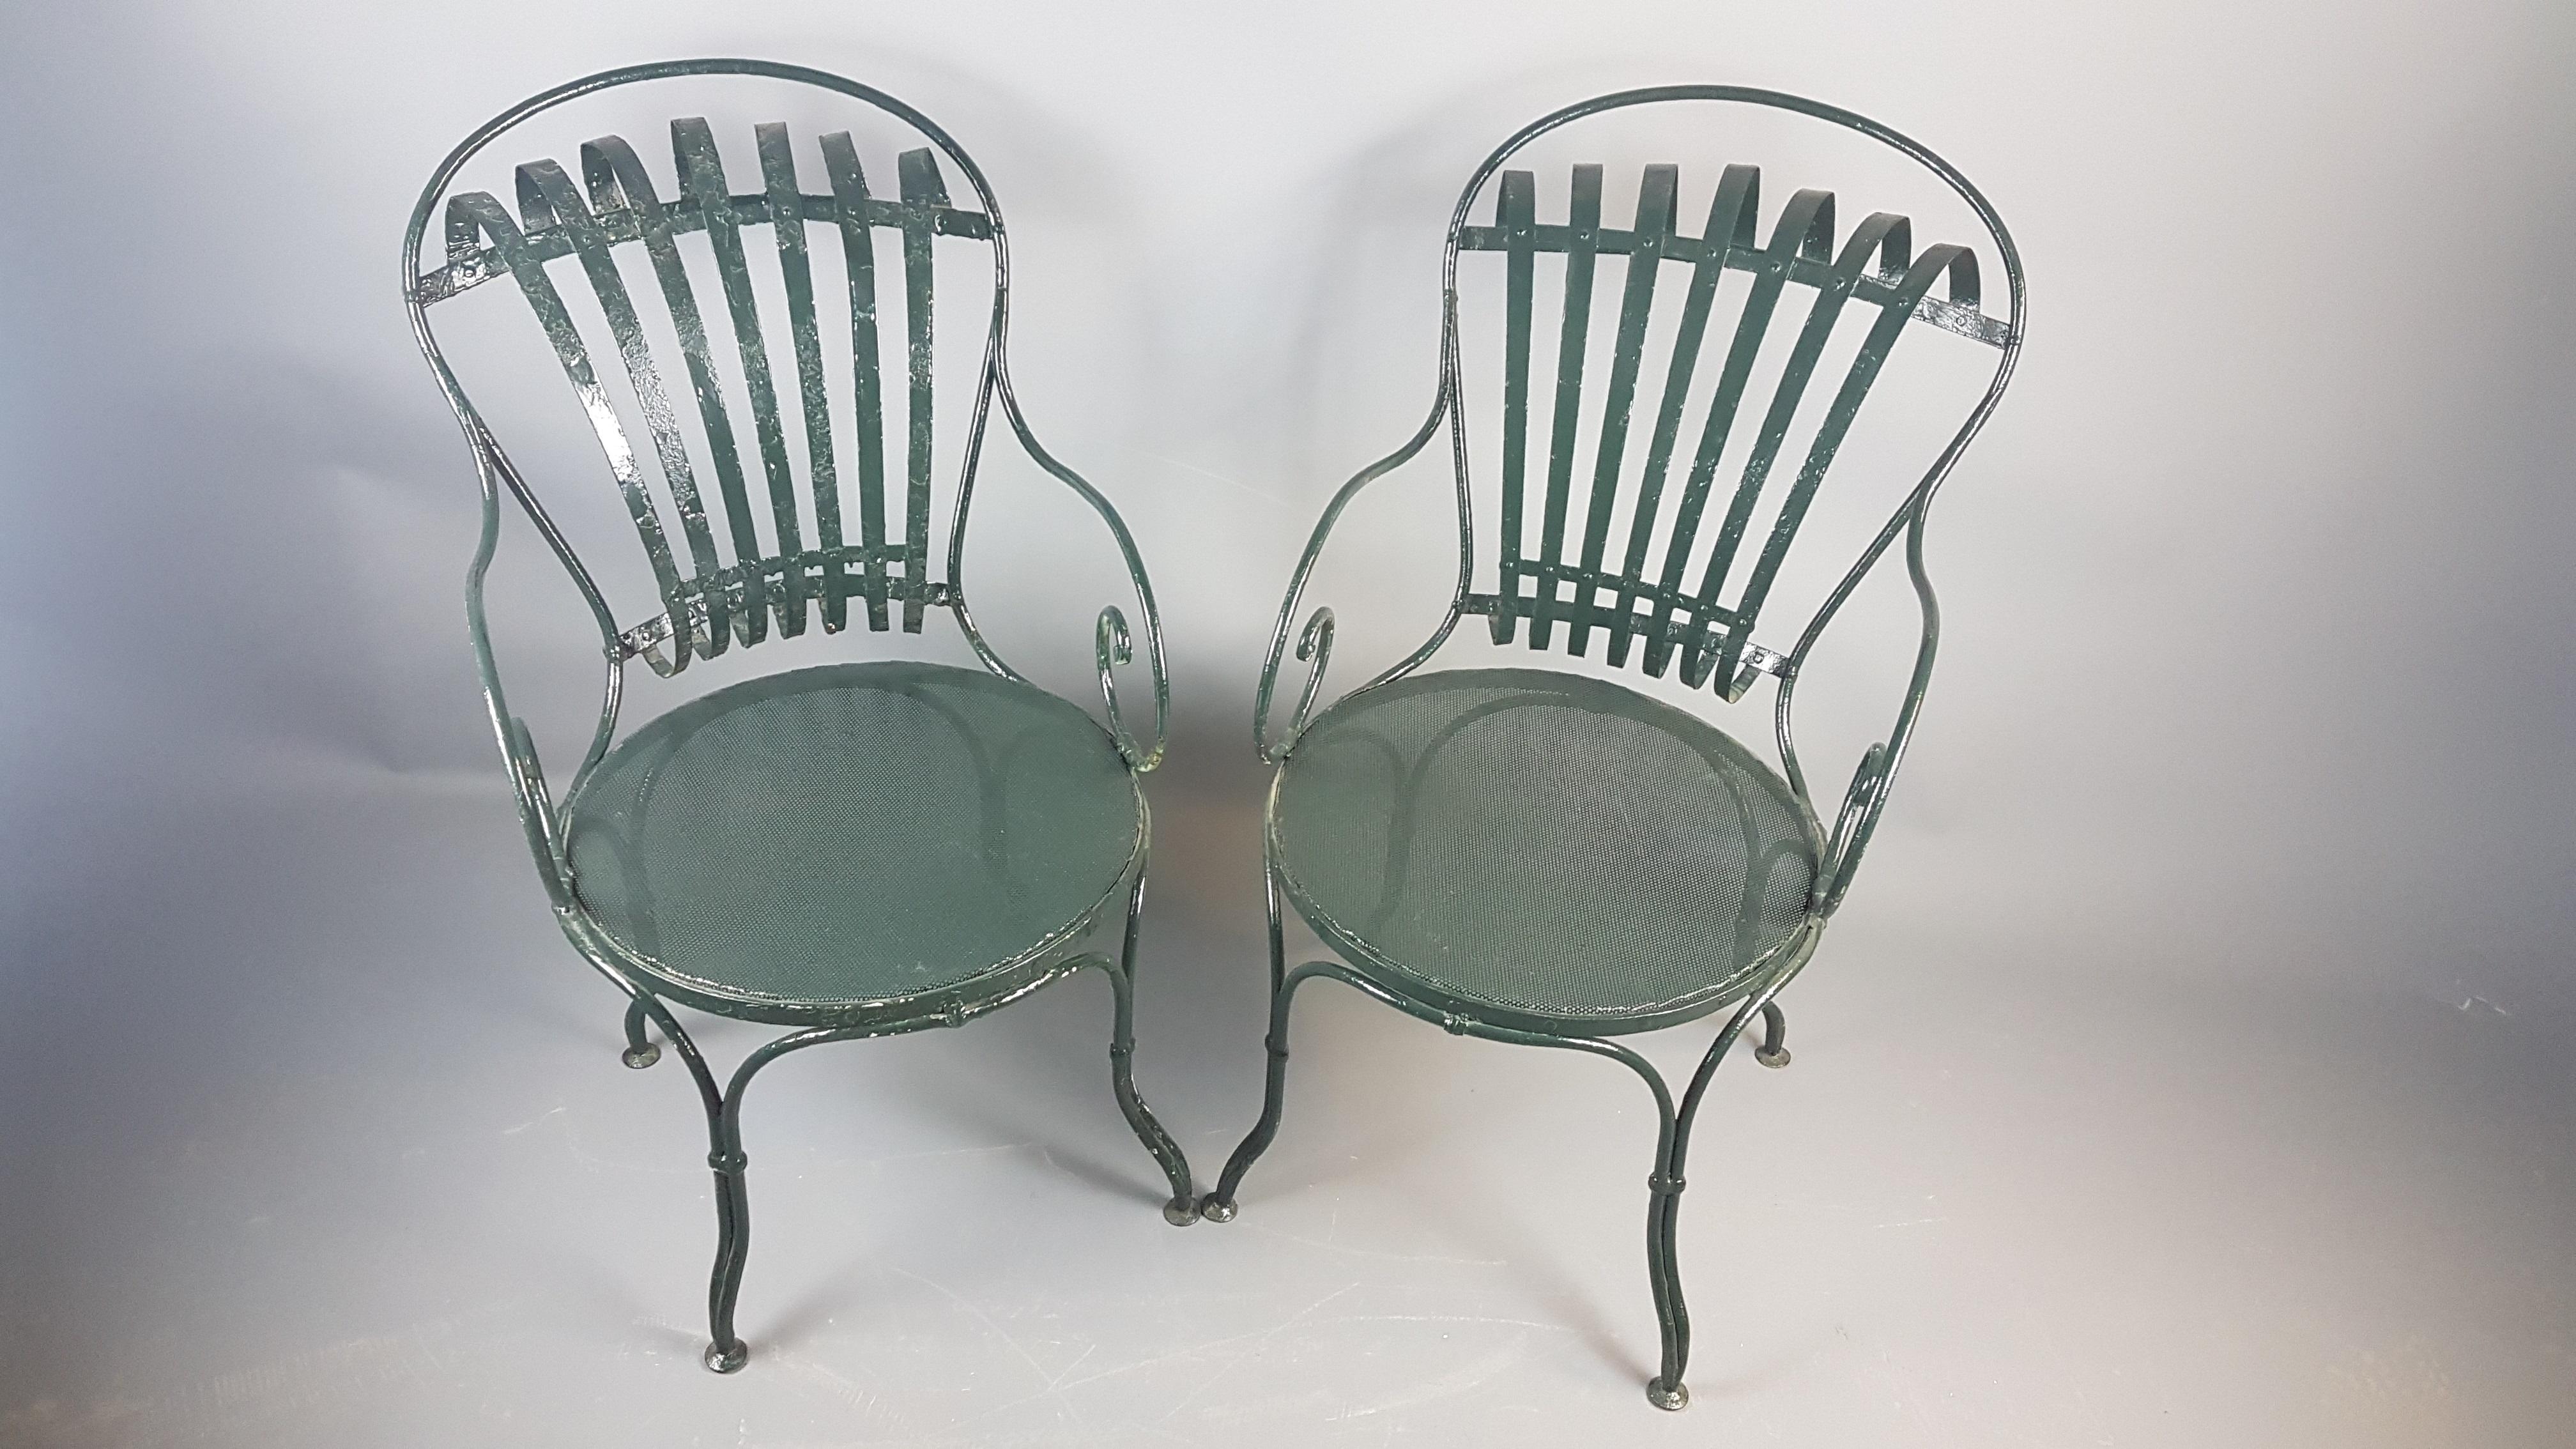 Pair of Green Francois Carre Chairs Designed by Le Corbusier For Sale 1